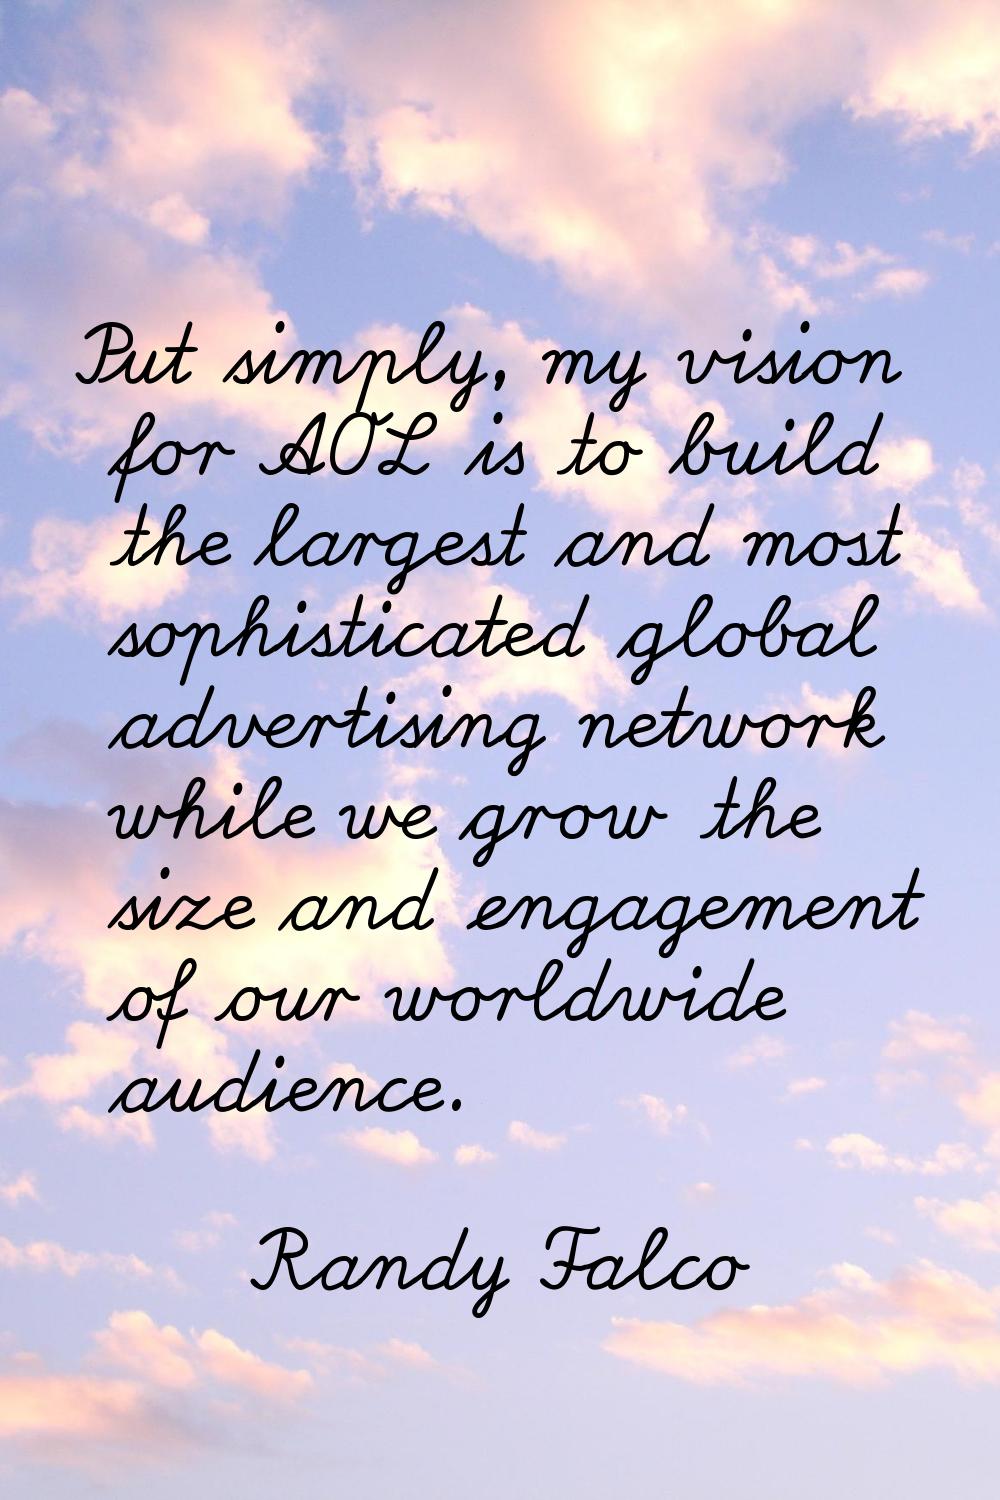 Put simply, my vision for AOL is to build the largest and most sophisticated global advertising net